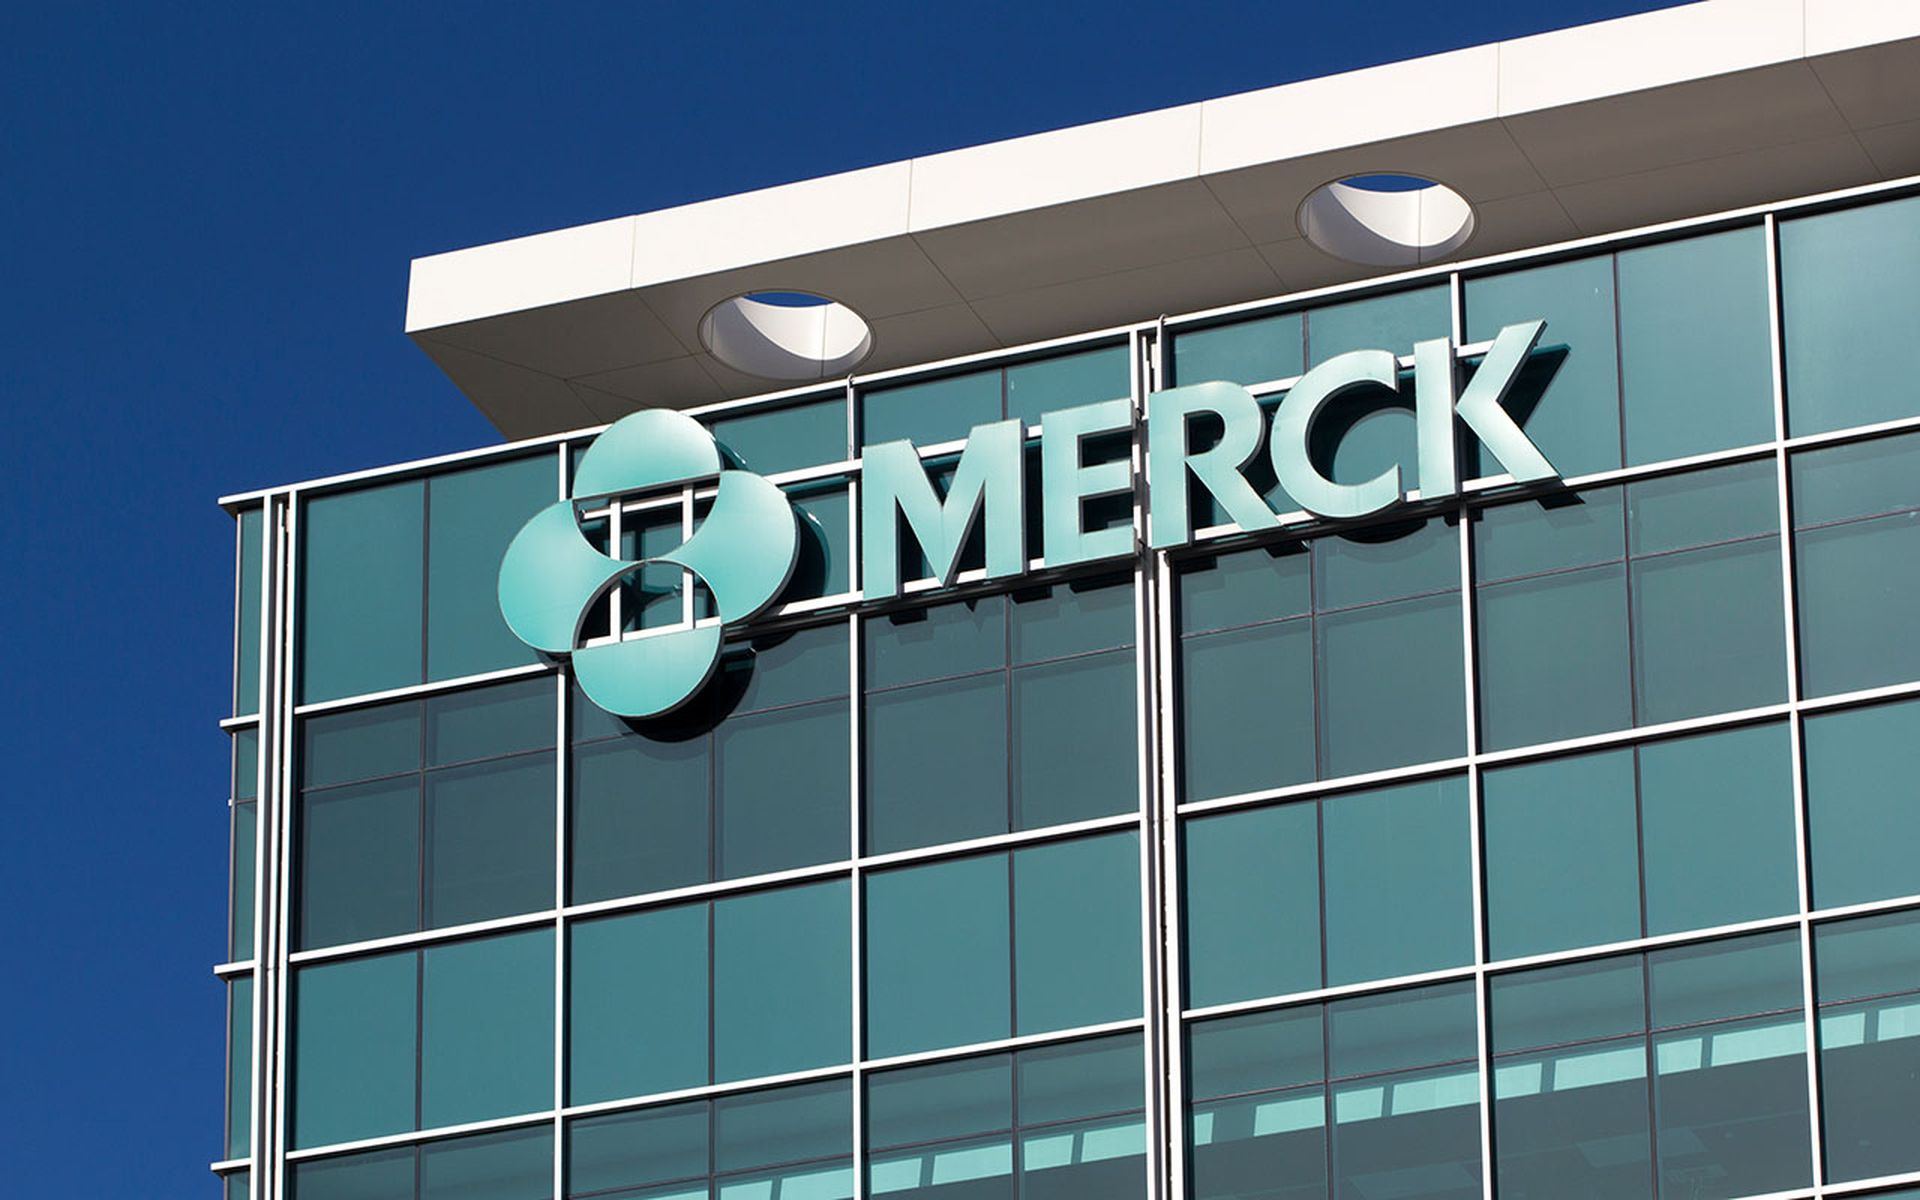 The Merck logo is seen on the side of a building